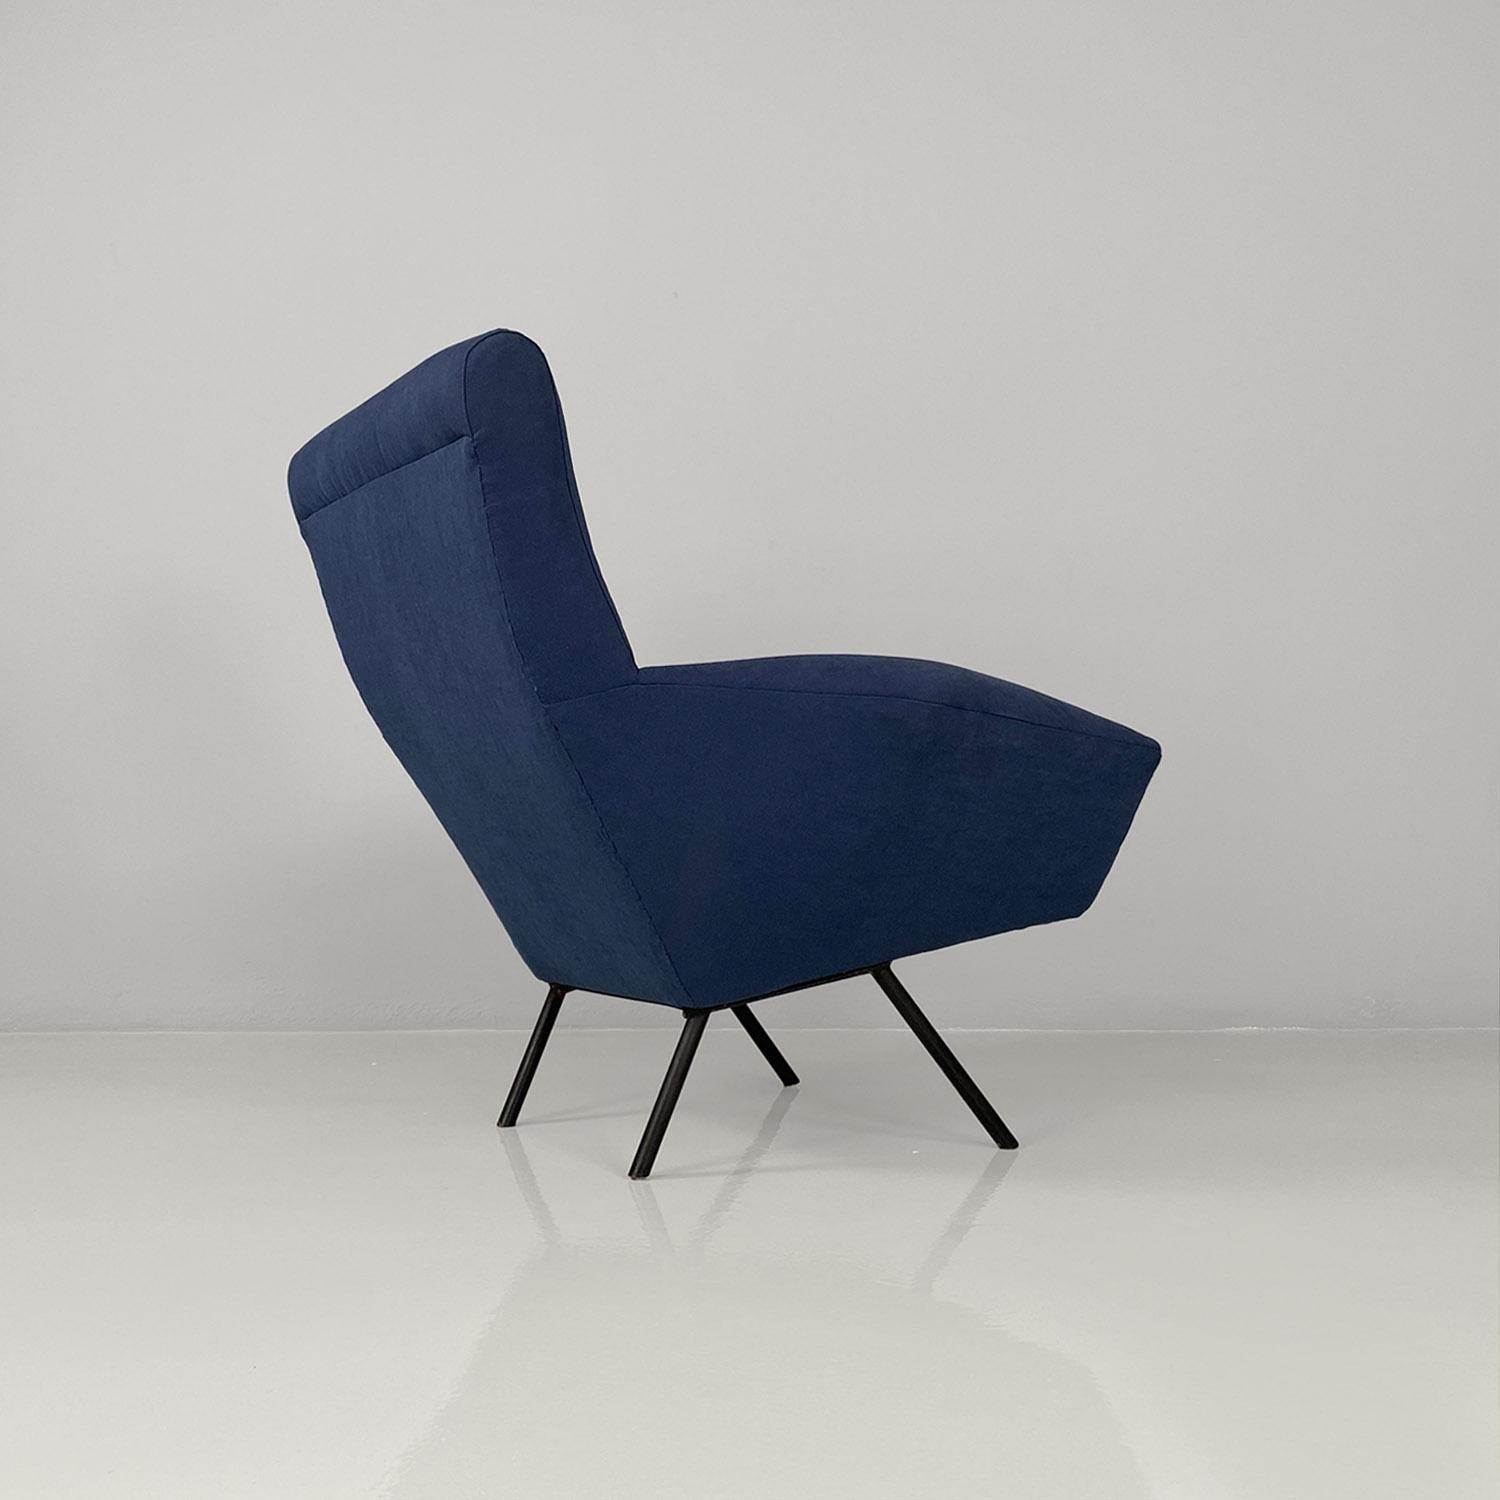 Italian mid-century modern blue fabric and black metal armchairs, 1960s For Sale 2